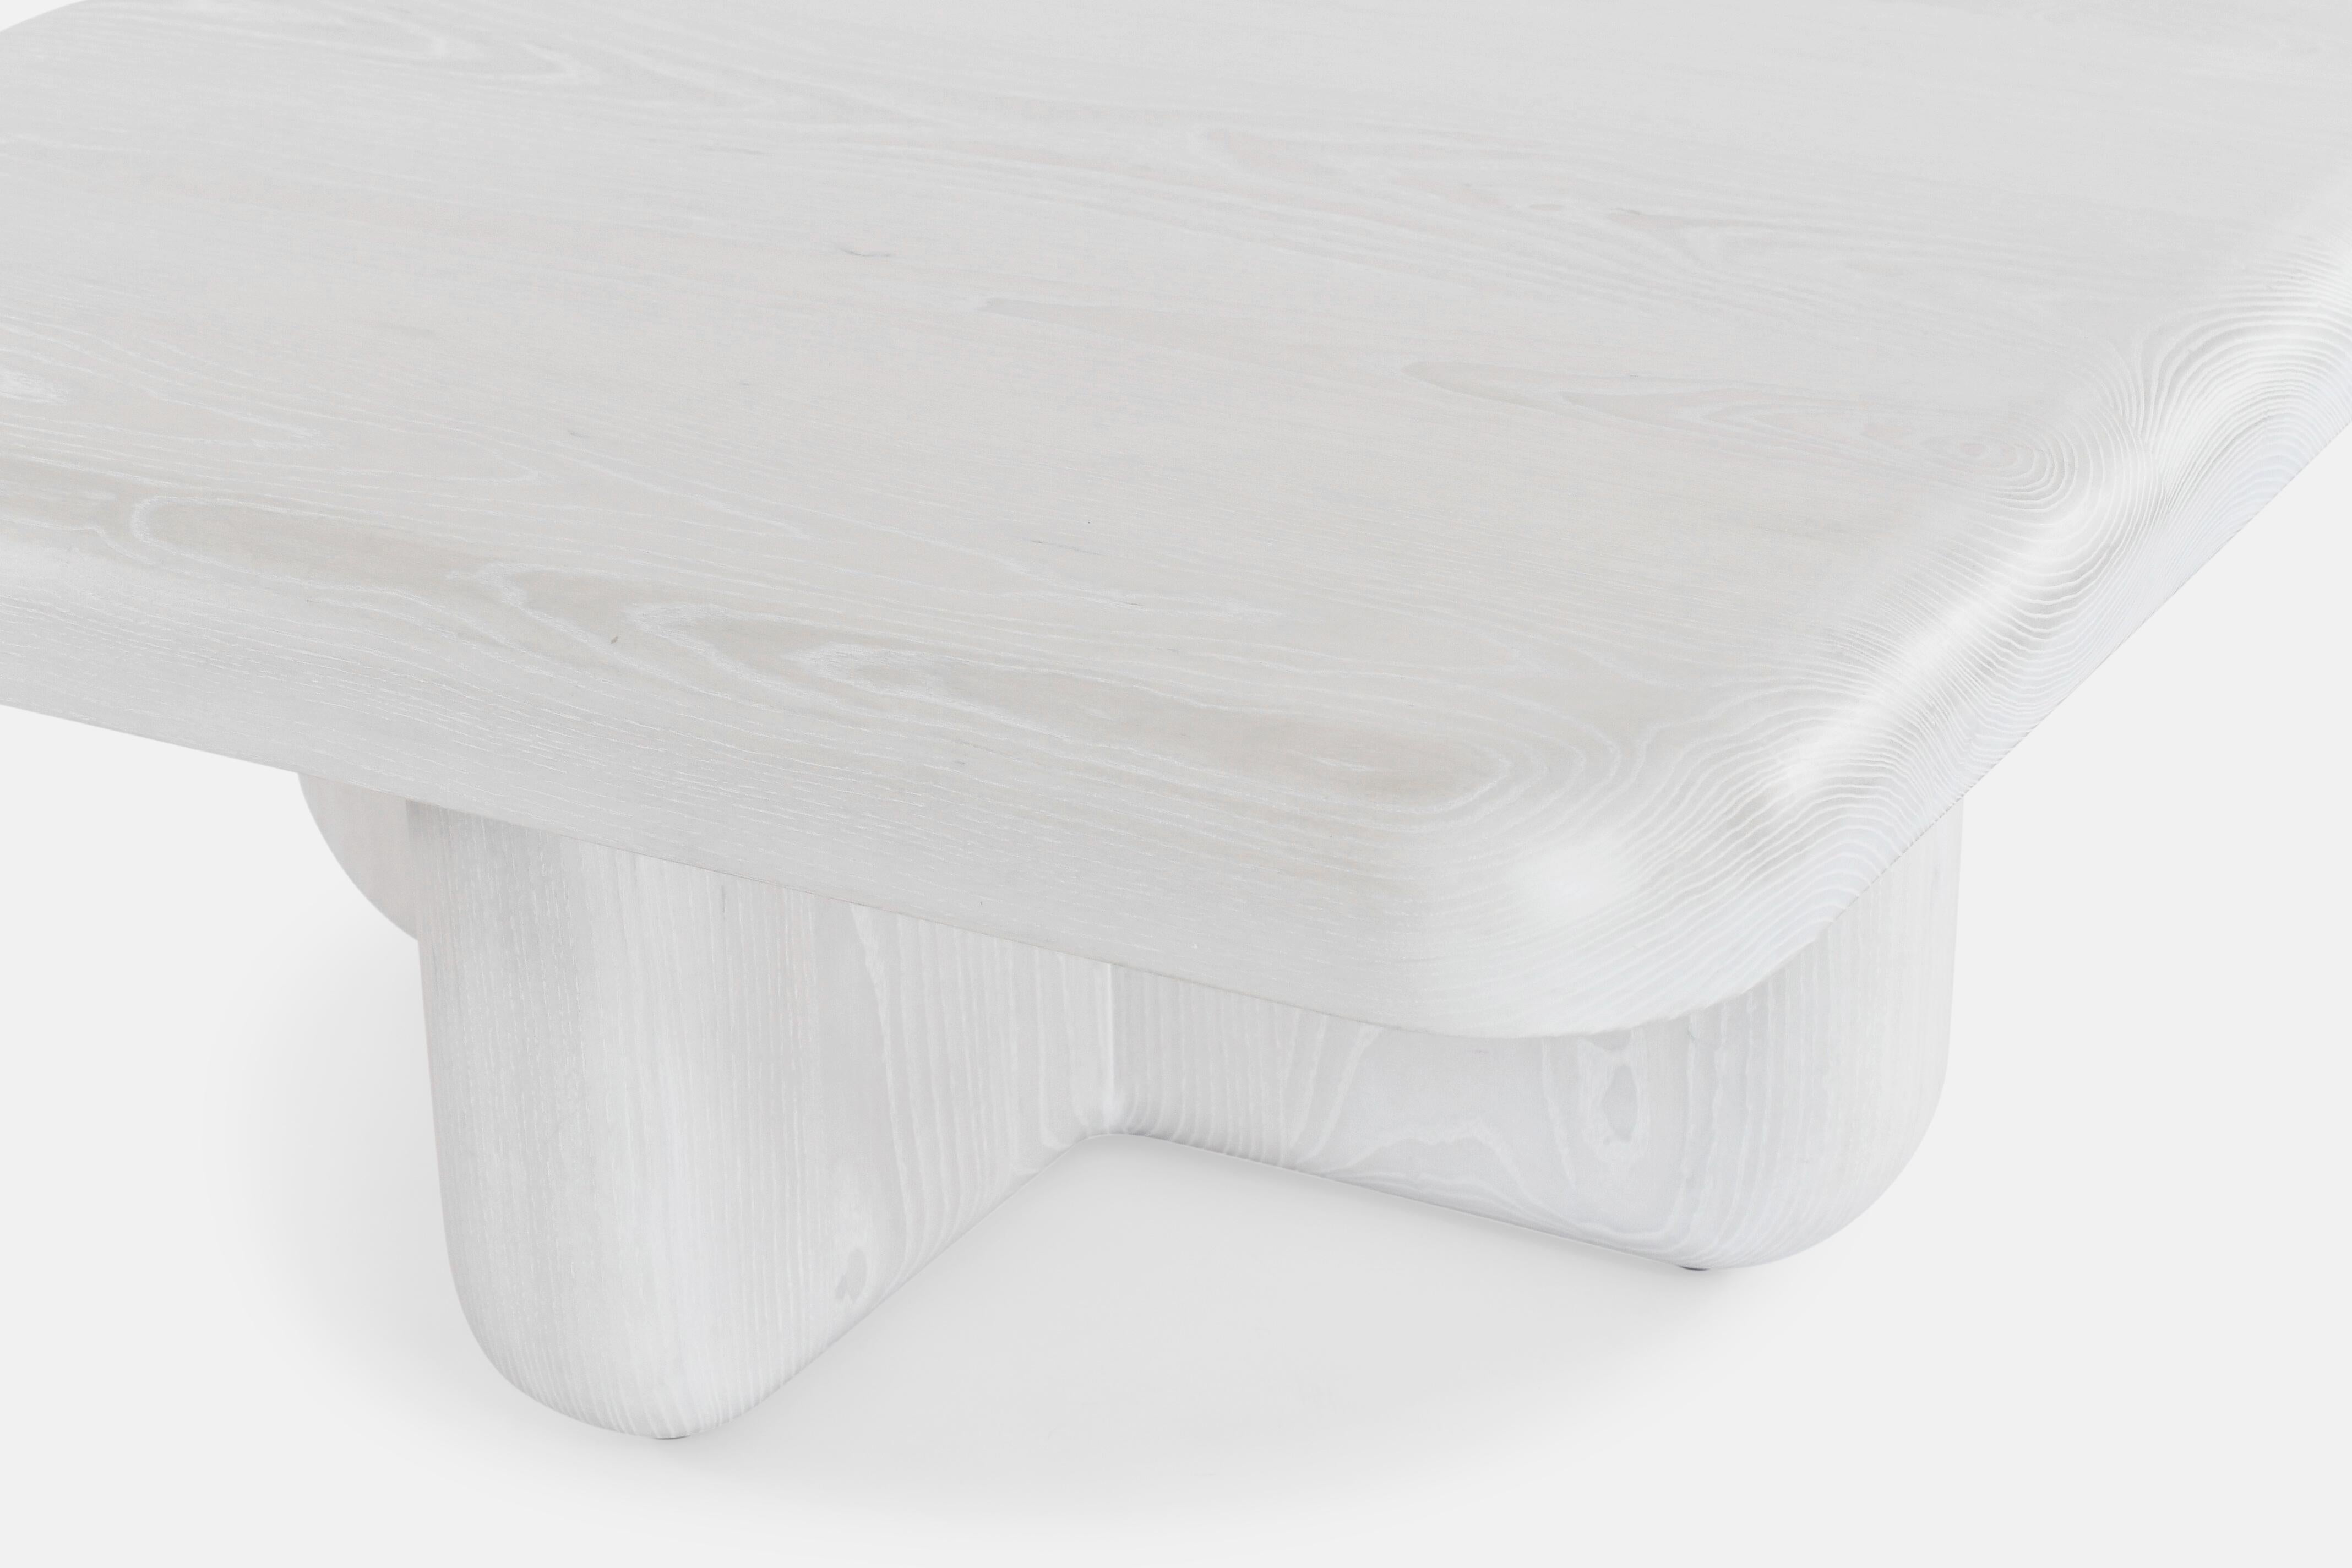 The Iris coffee table uses craft as the foundation for this minimal yet bold and distinct piece. The radiused edges further soften the blocky form, removing all the rigid lines. The perfect table for game night or dinner and a movie at home.

48